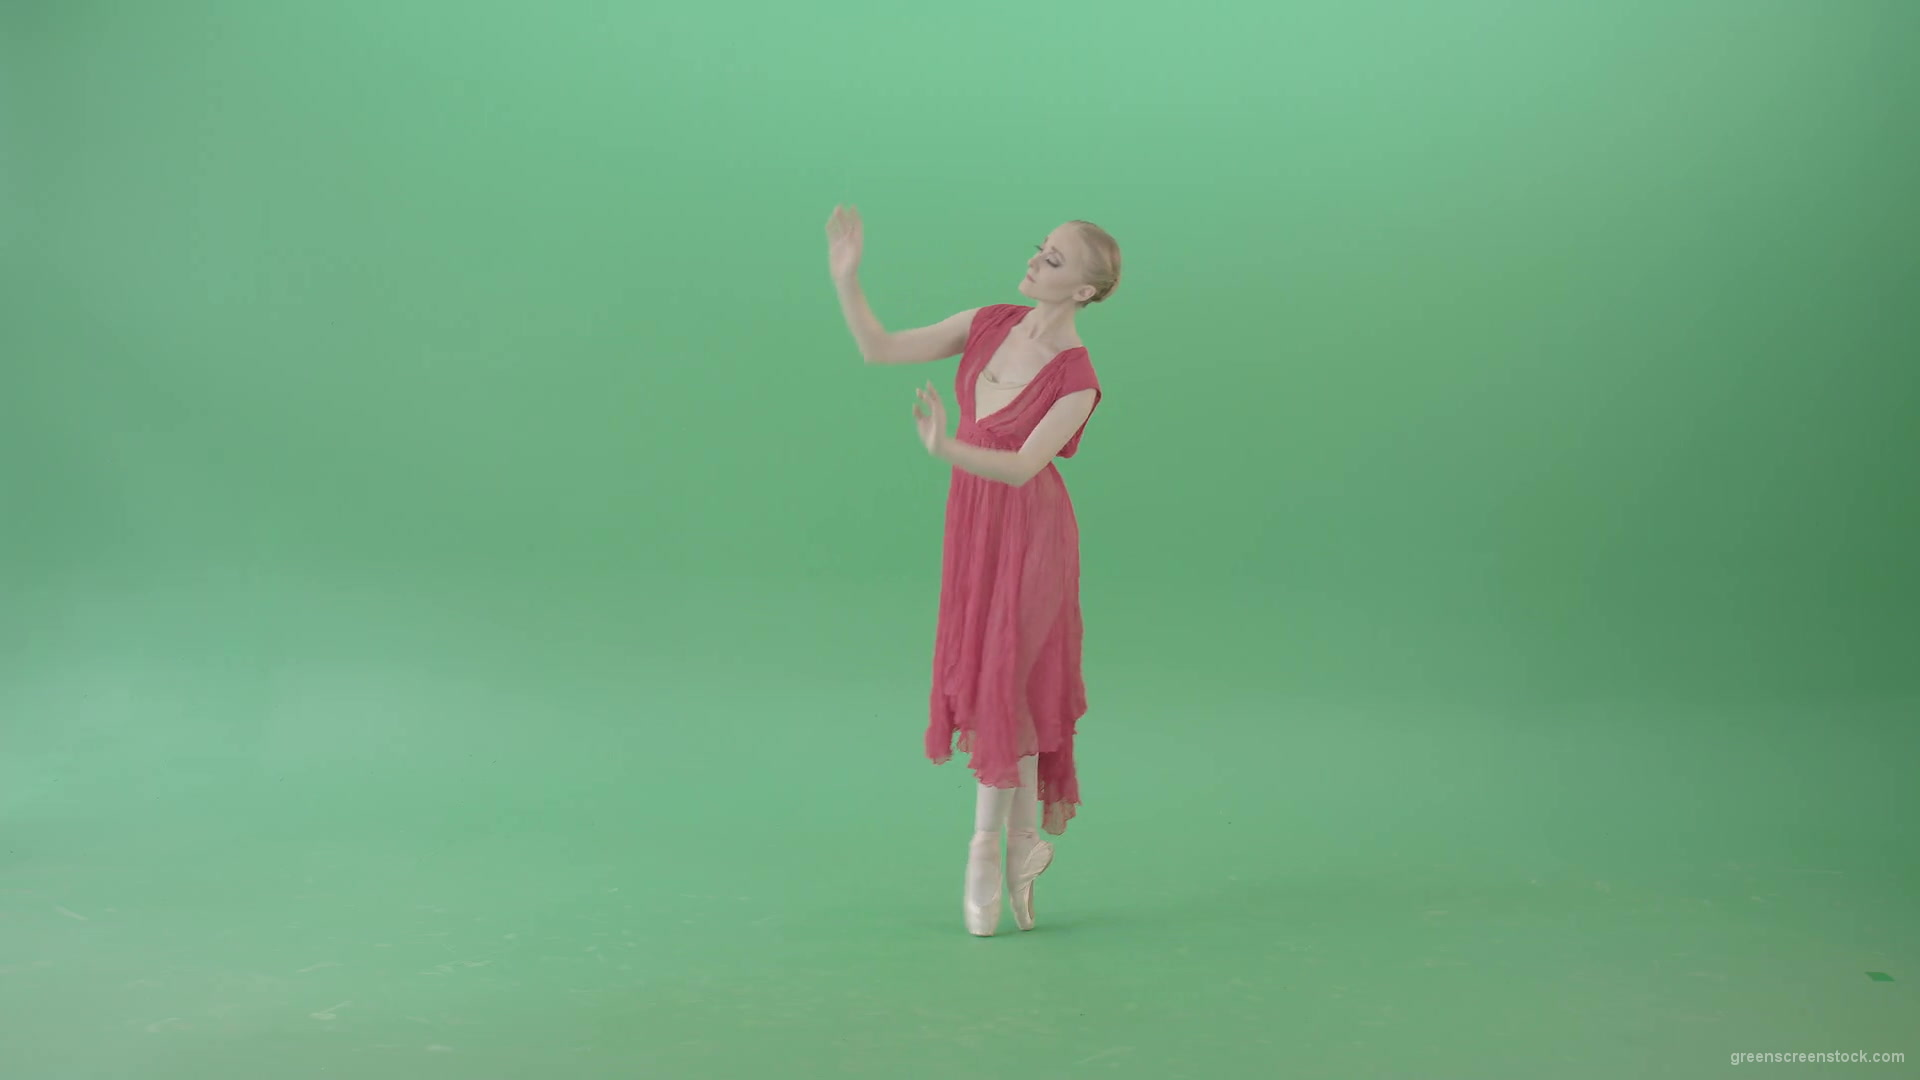 Blonde-girl-in-red-dress-dancing-classical-ballet-on-green-screen-4K-video-footage-1920_006 Green Screen Stock